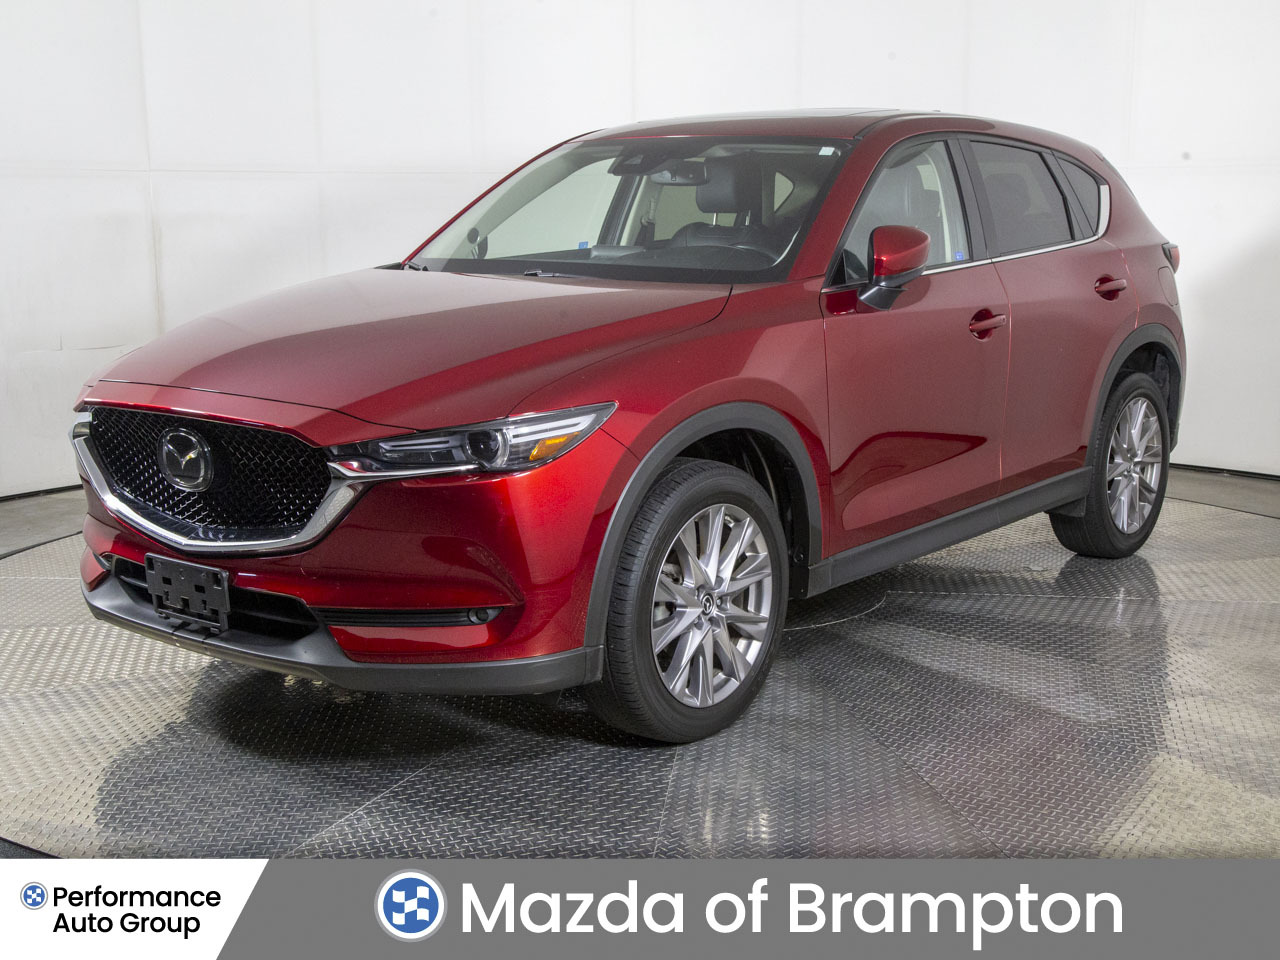 2020 Mazda CX-5 GT AWD SUNROOF LEATHER BOSE AUDIO NAVI 1 OWNER +++